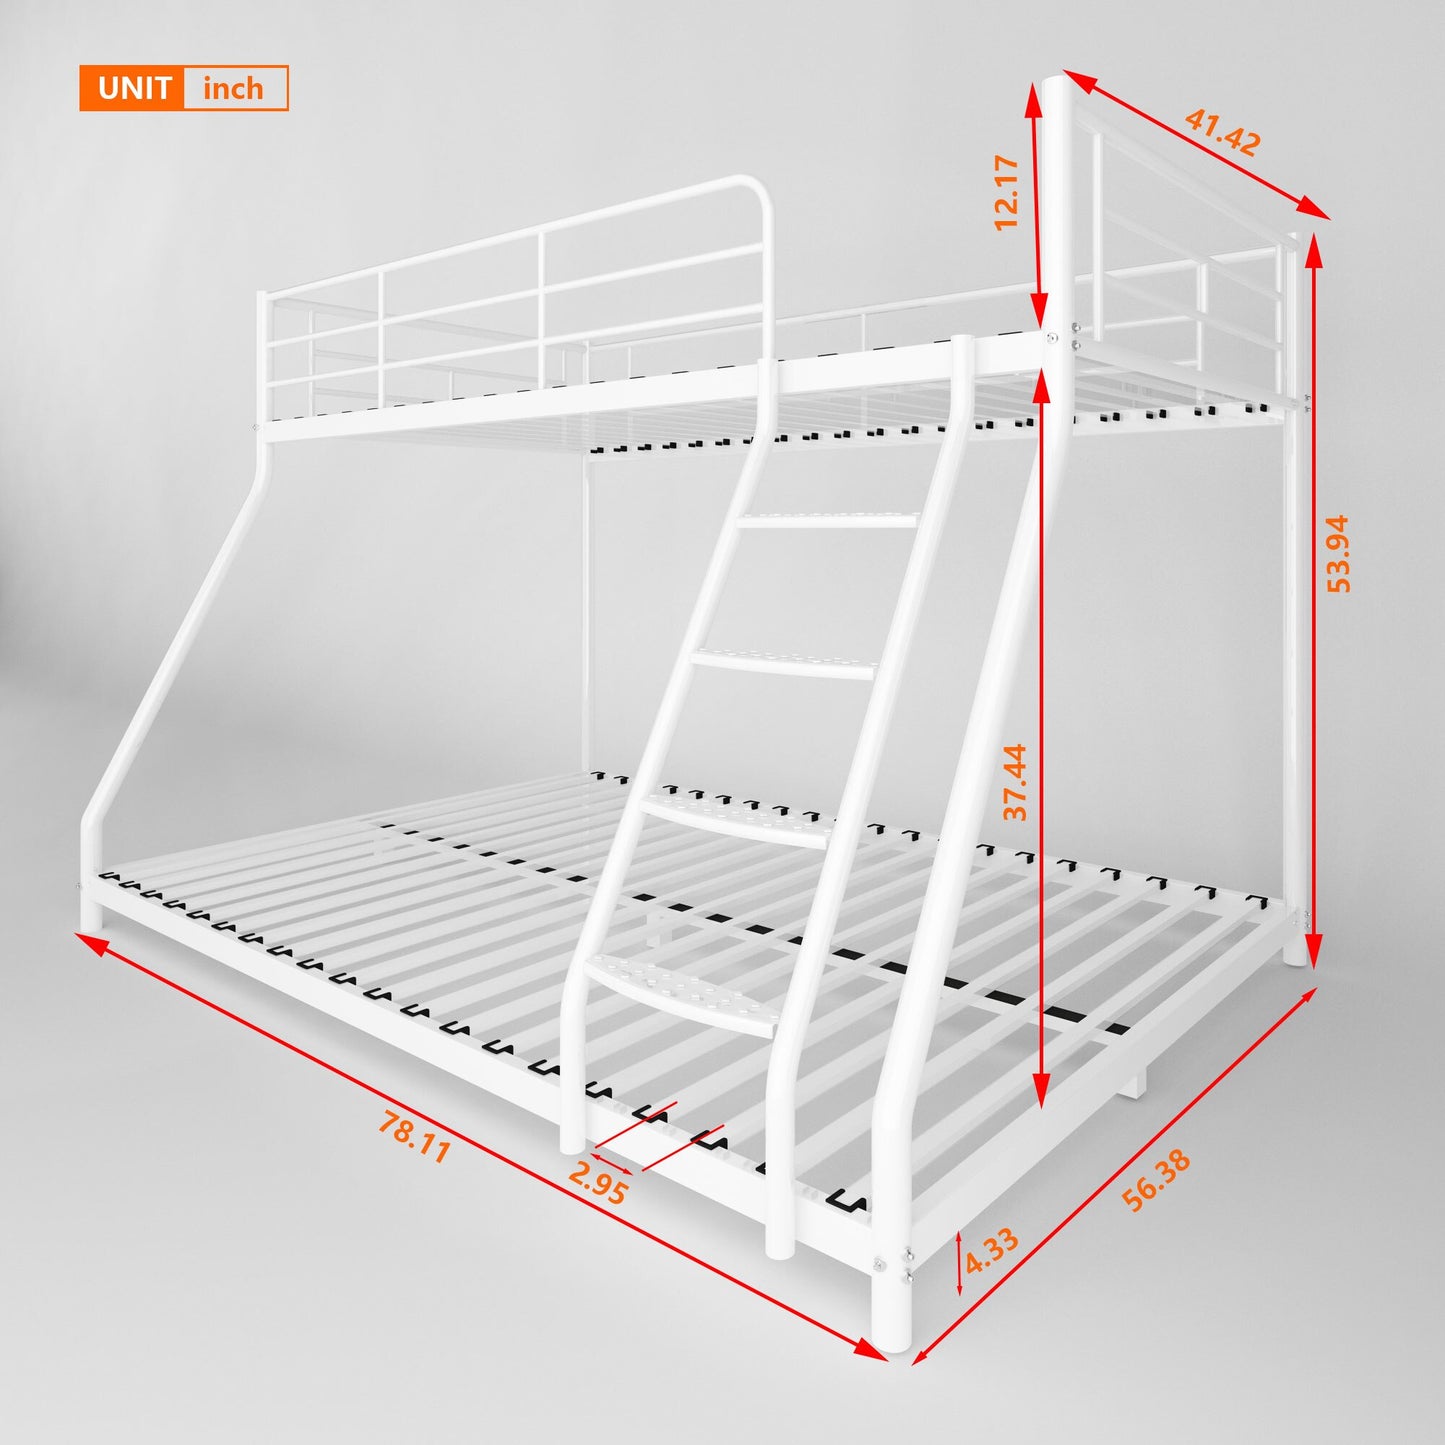 Twin over Full Metal Bunk Bed